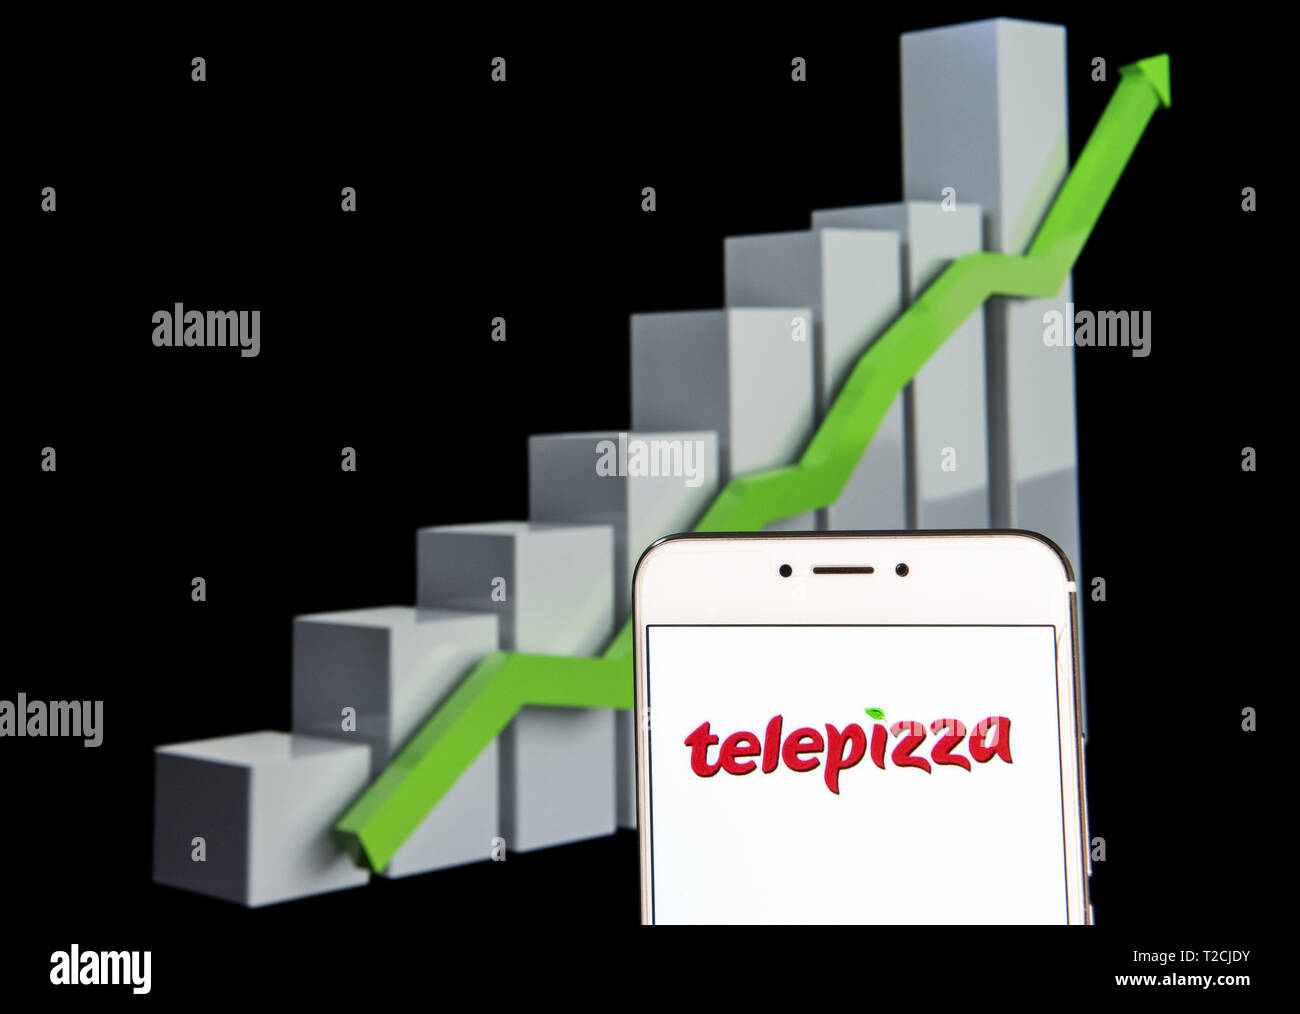 February 10, 2019 - Hong Kong - In this photo illustration a Spanish pizza restaurant franchise Telepizza logo is seen on an android mobile device with an ascent growth chart in the background. (Credit Image: © Budrul Chukrut/SOPA Images via ZUMA Wire) Stock Photo